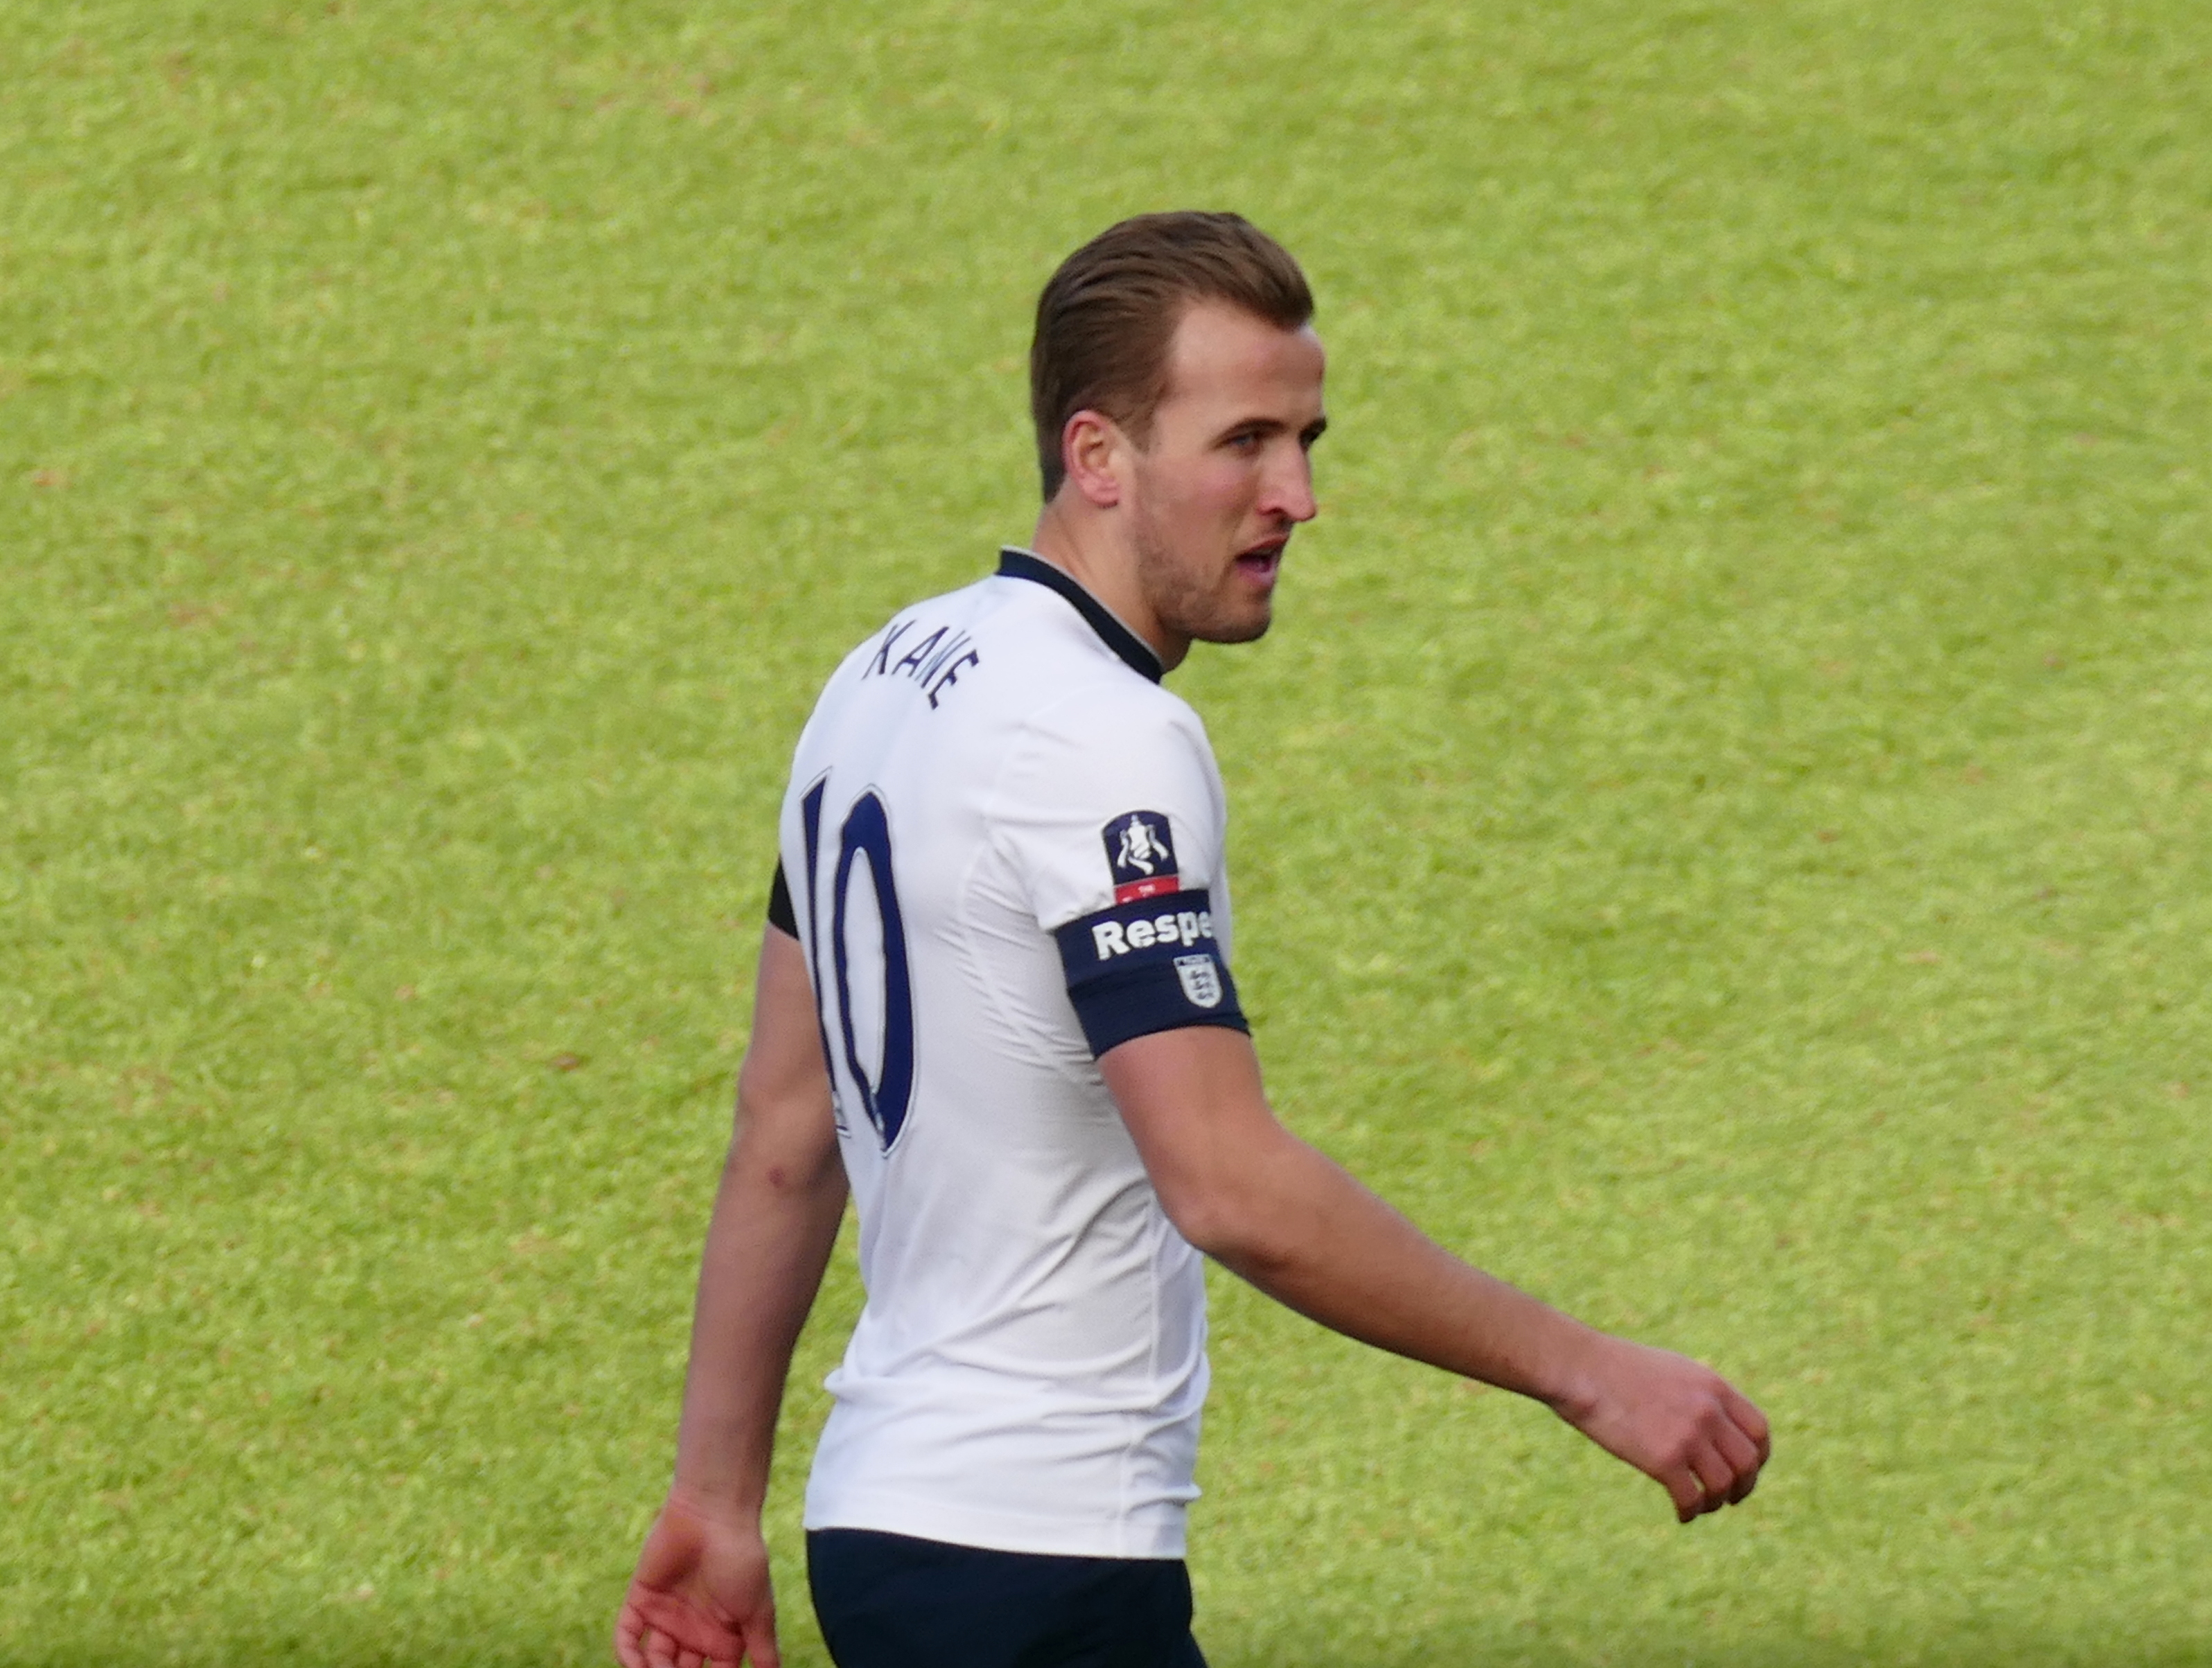 Tottenham team for Harry Kane's debut and first goal, 2014: Where